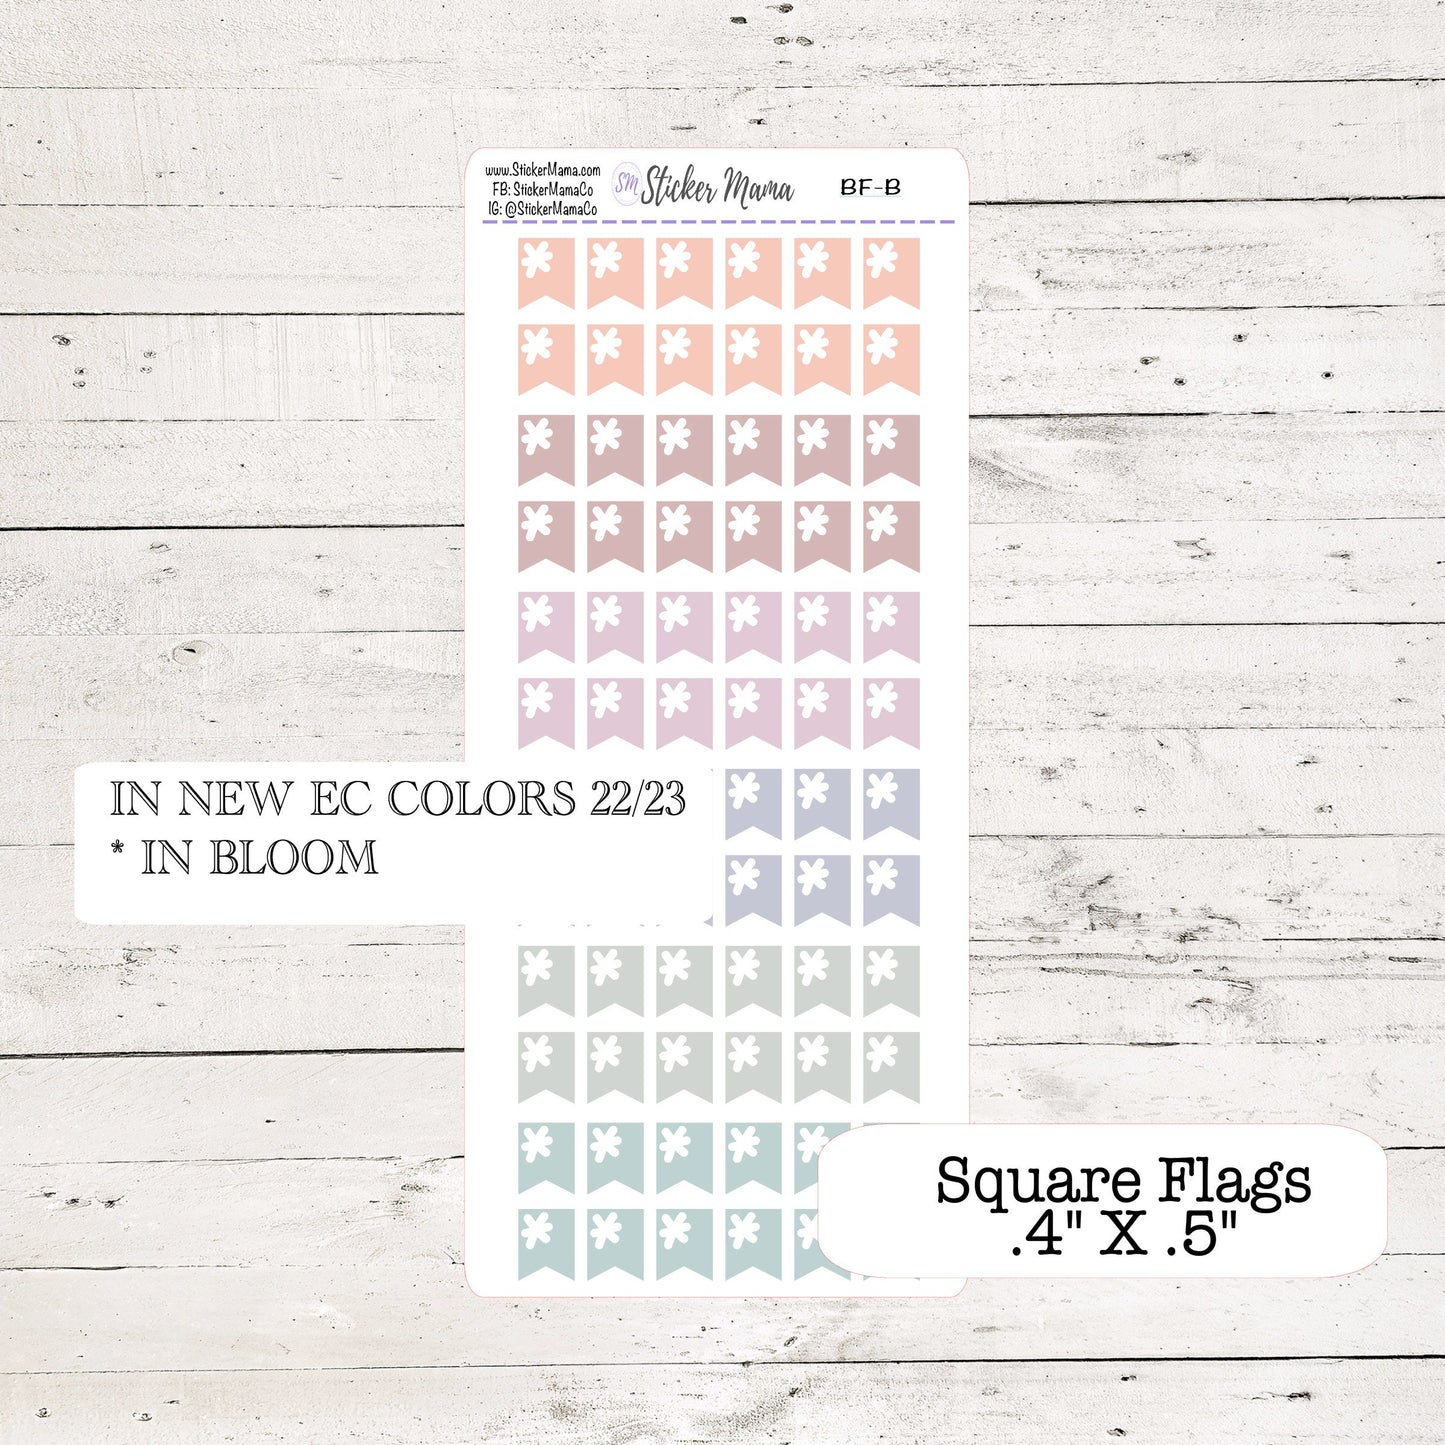 NEW ERIN CONDREN Colors - Updated Square Flags - In Bloom, Harmony, Harmony Neutral, Colorblends - Square Flags - Planner Stickers